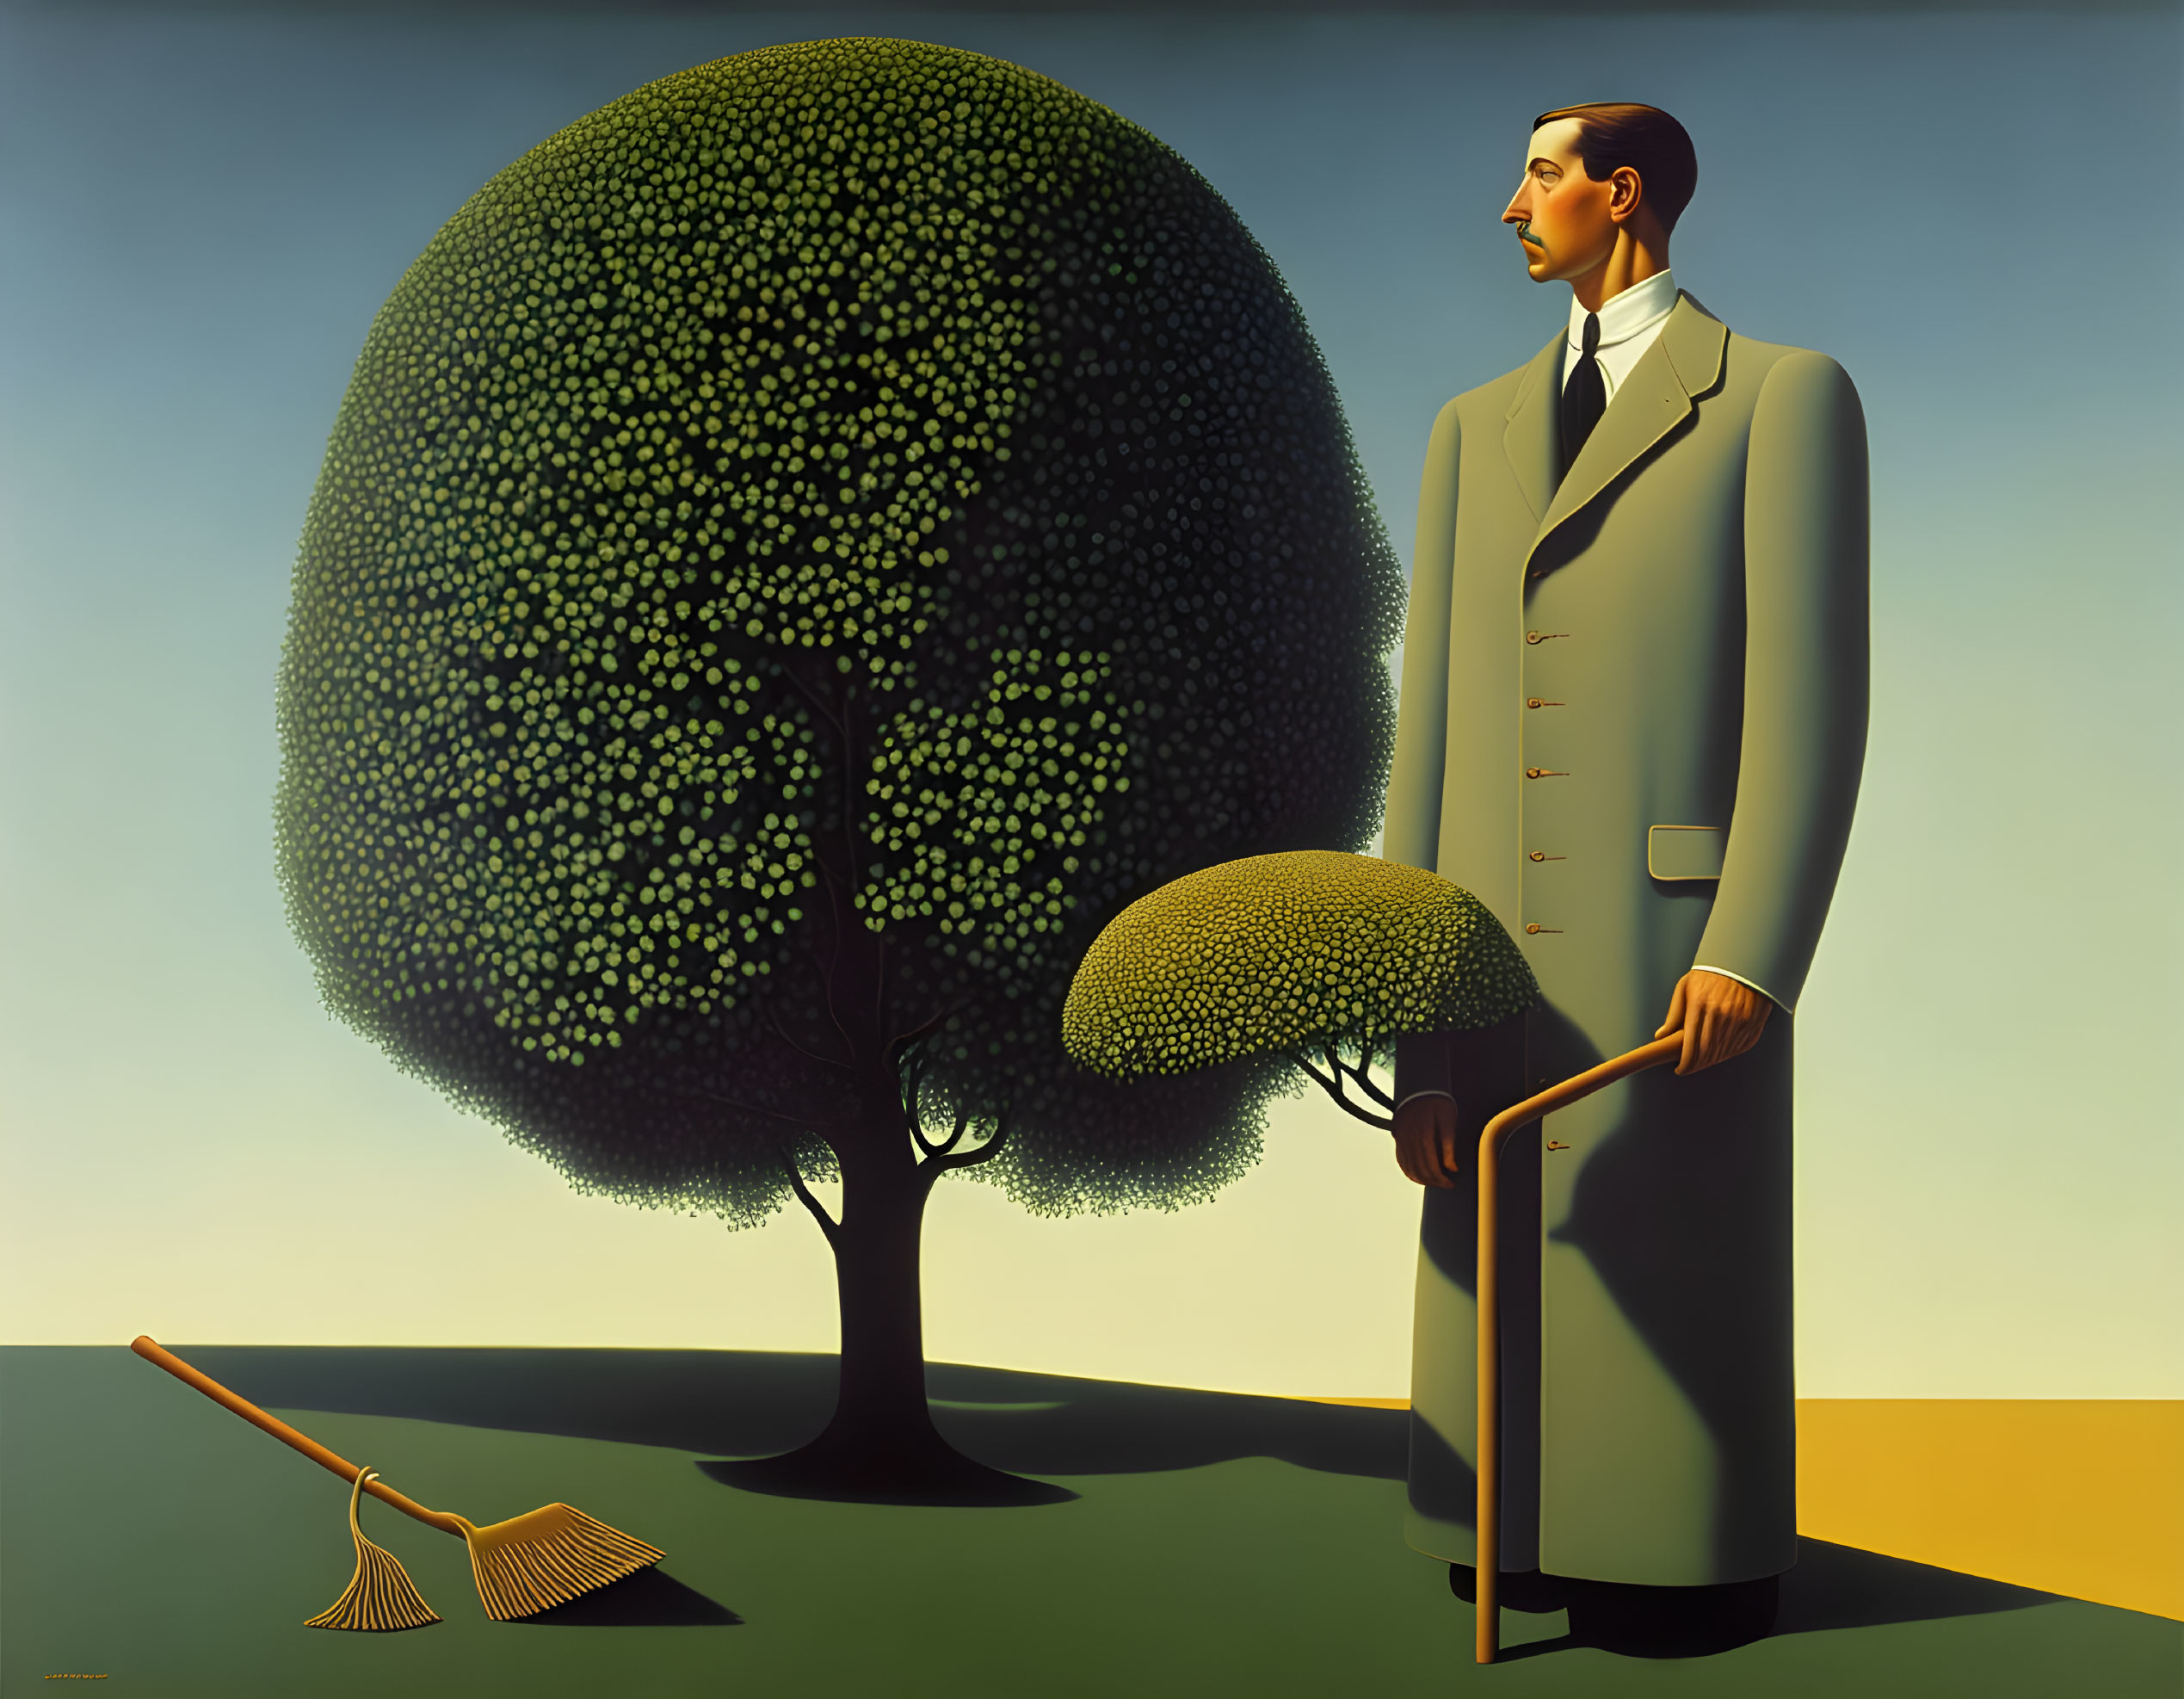 Surrealist painting: man in suit with tree mirroring his head and rake on ground